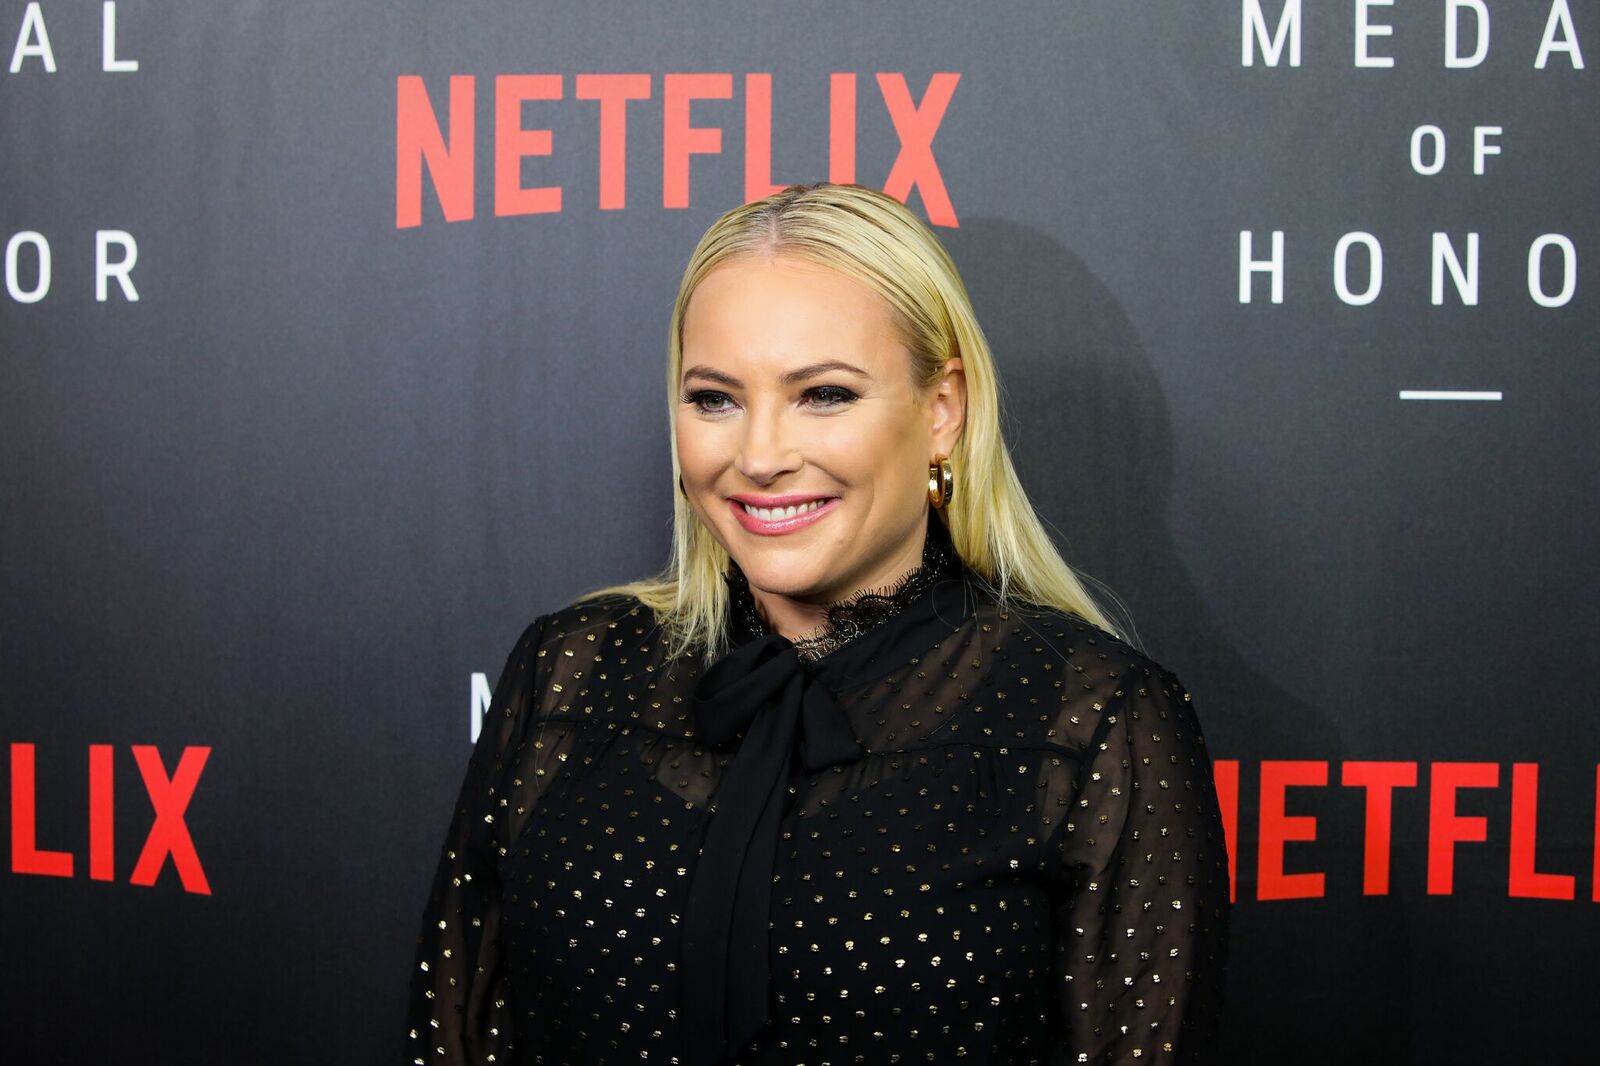 Meghan McCain, Co-Host of 'The View', at the Netflix 'Medal of Honor' screening and panel discussion at the US Navy Memorial Burke Theater on November 13, 2018 in Washington, DC | Photo: Getty Images